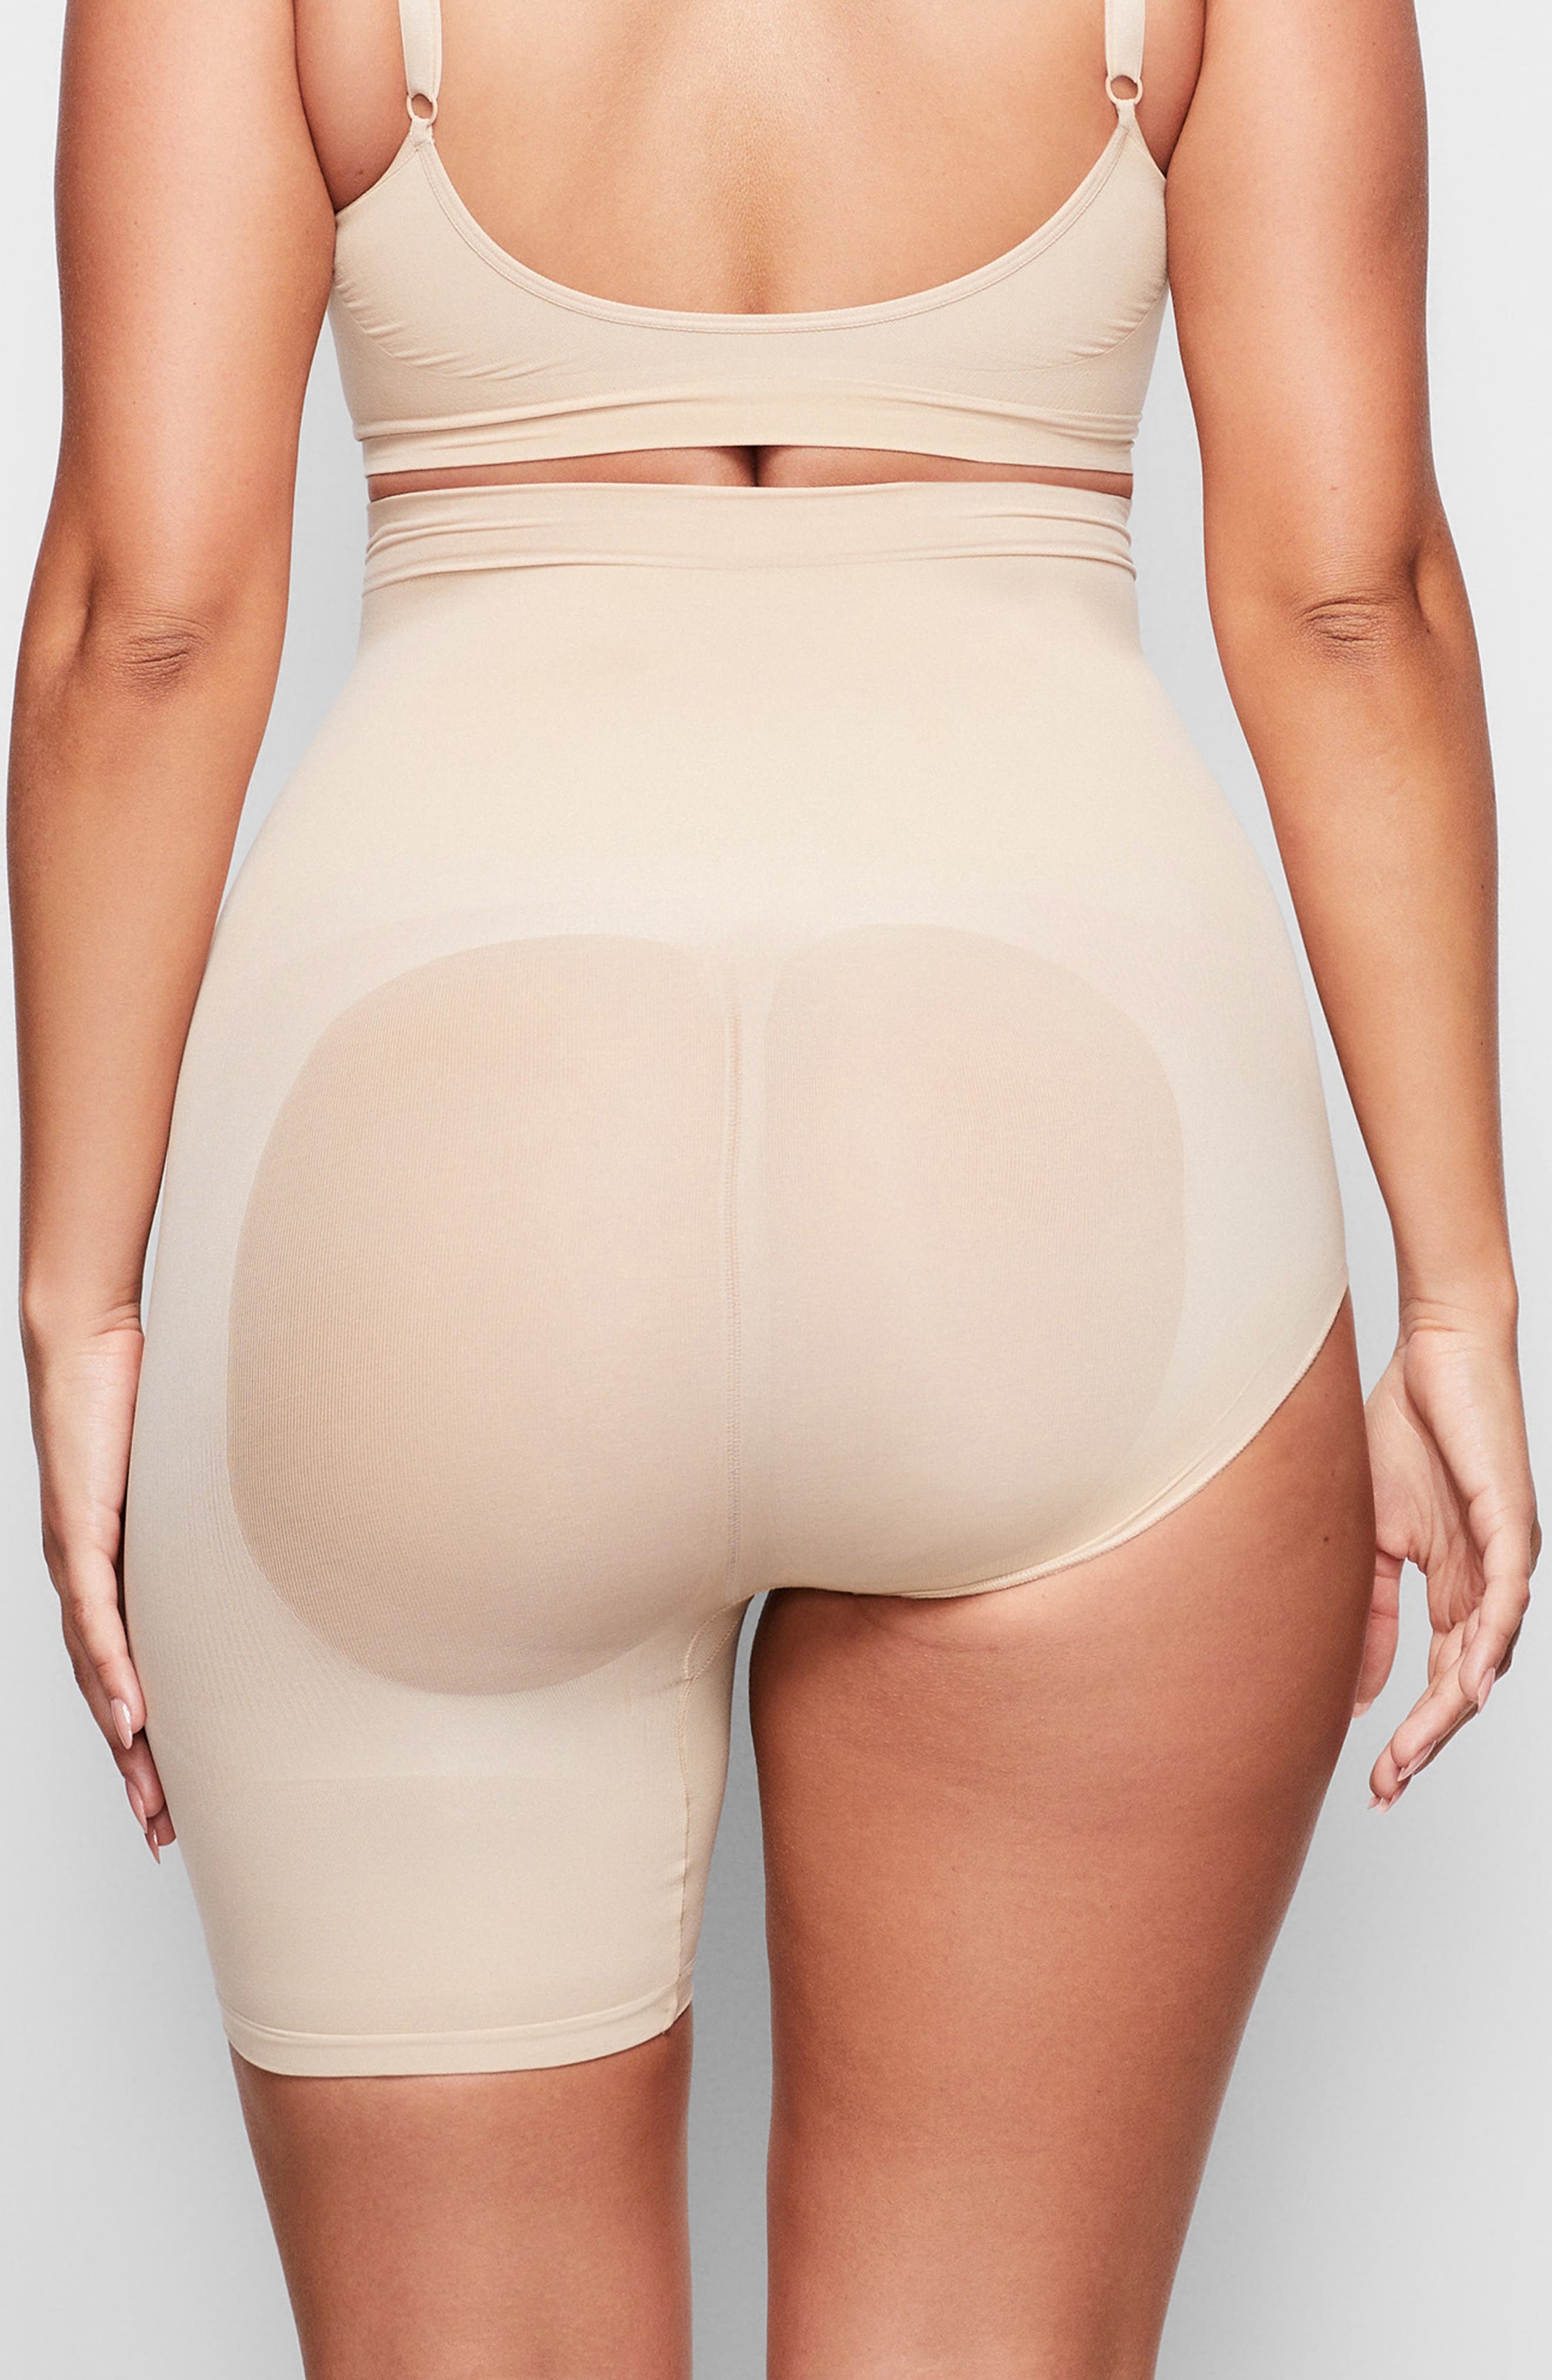 Kim Kardashian's Skims Line Is Now Available At Nordstrom, 46% OFF